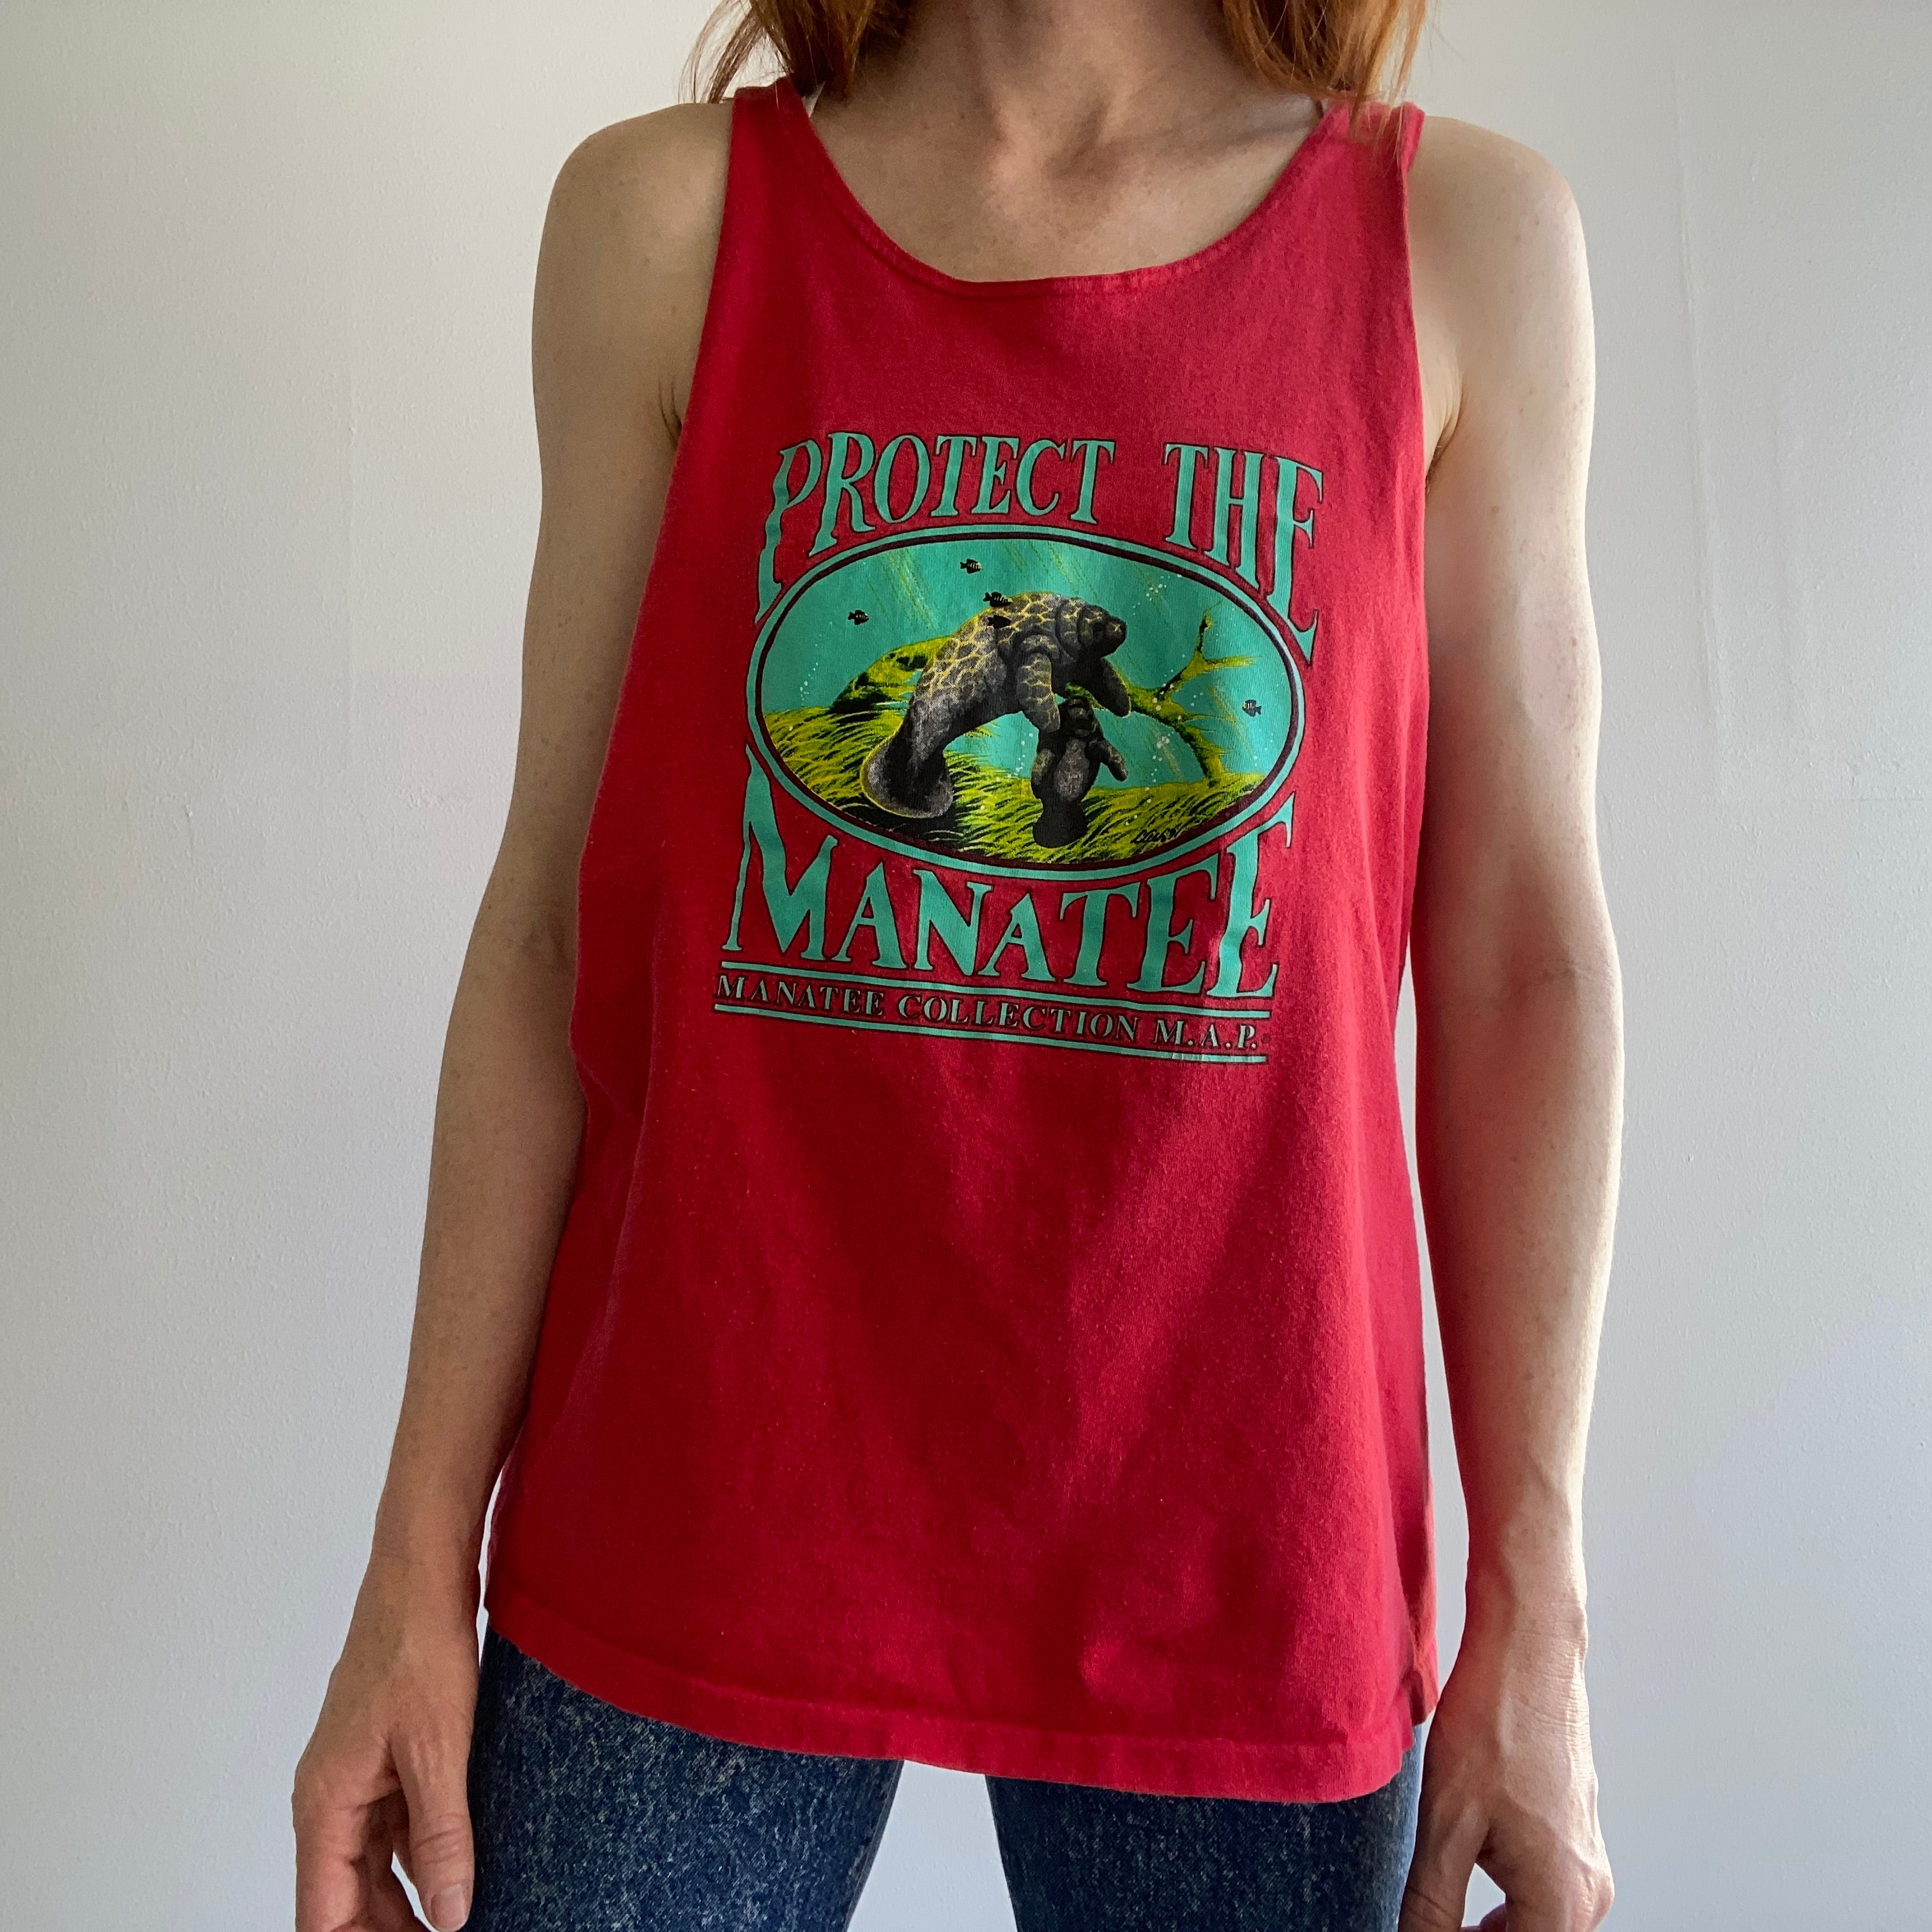 1980s Protect the Manatees Tank Top - Awwwwww